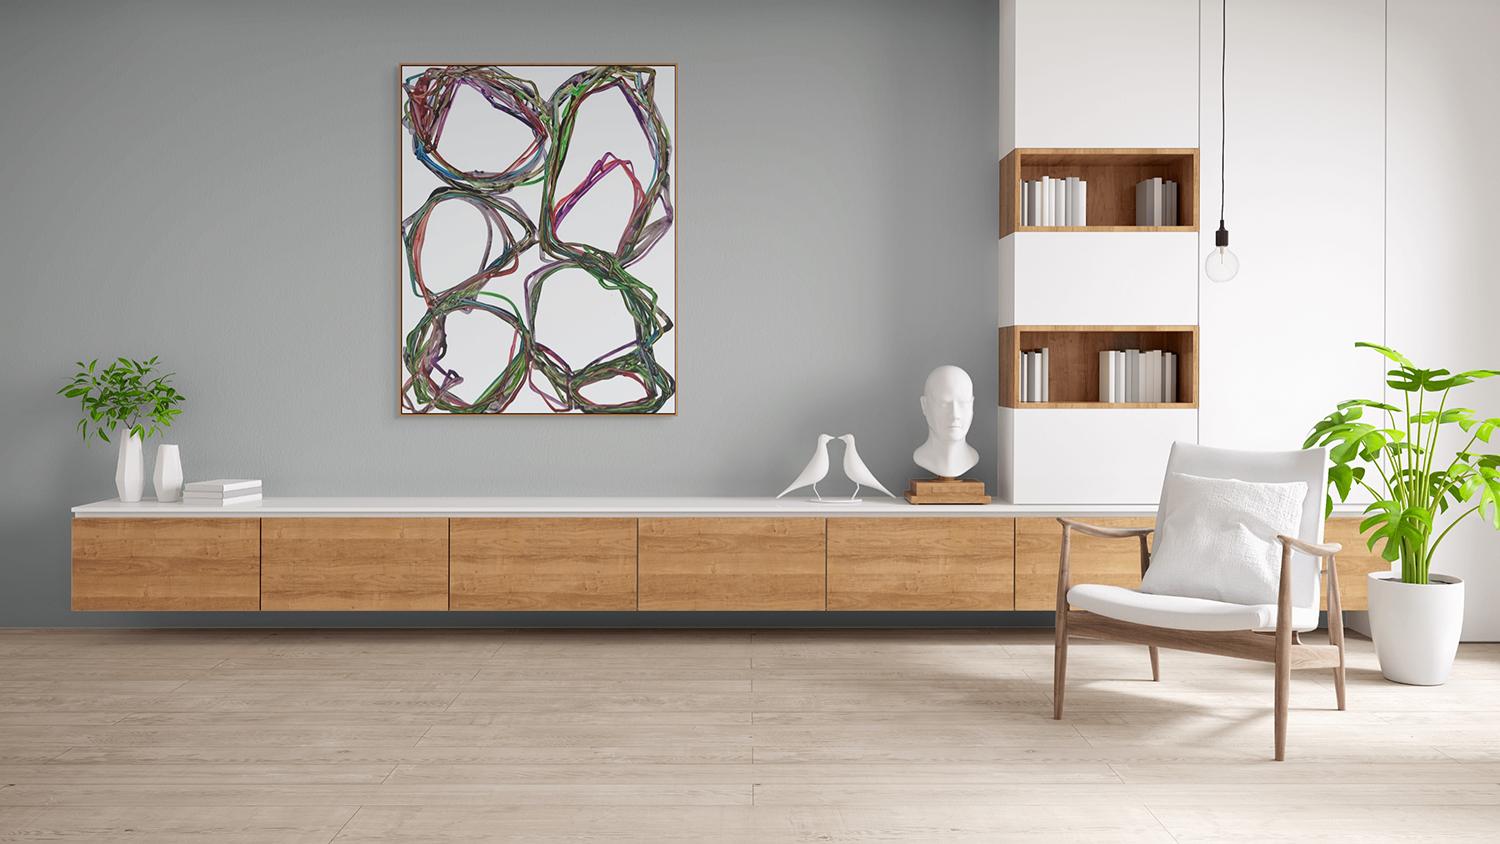 N°1149 (Abstract Painting)

Acrylic on transparent vinyl - unframed

Jean-Daniel Salvat is a French abstract artist based in Nîmes, France. 
He attended the Ecole Nationale Supérieure des Beaux-Arts under the directorship of the famous artist Claude